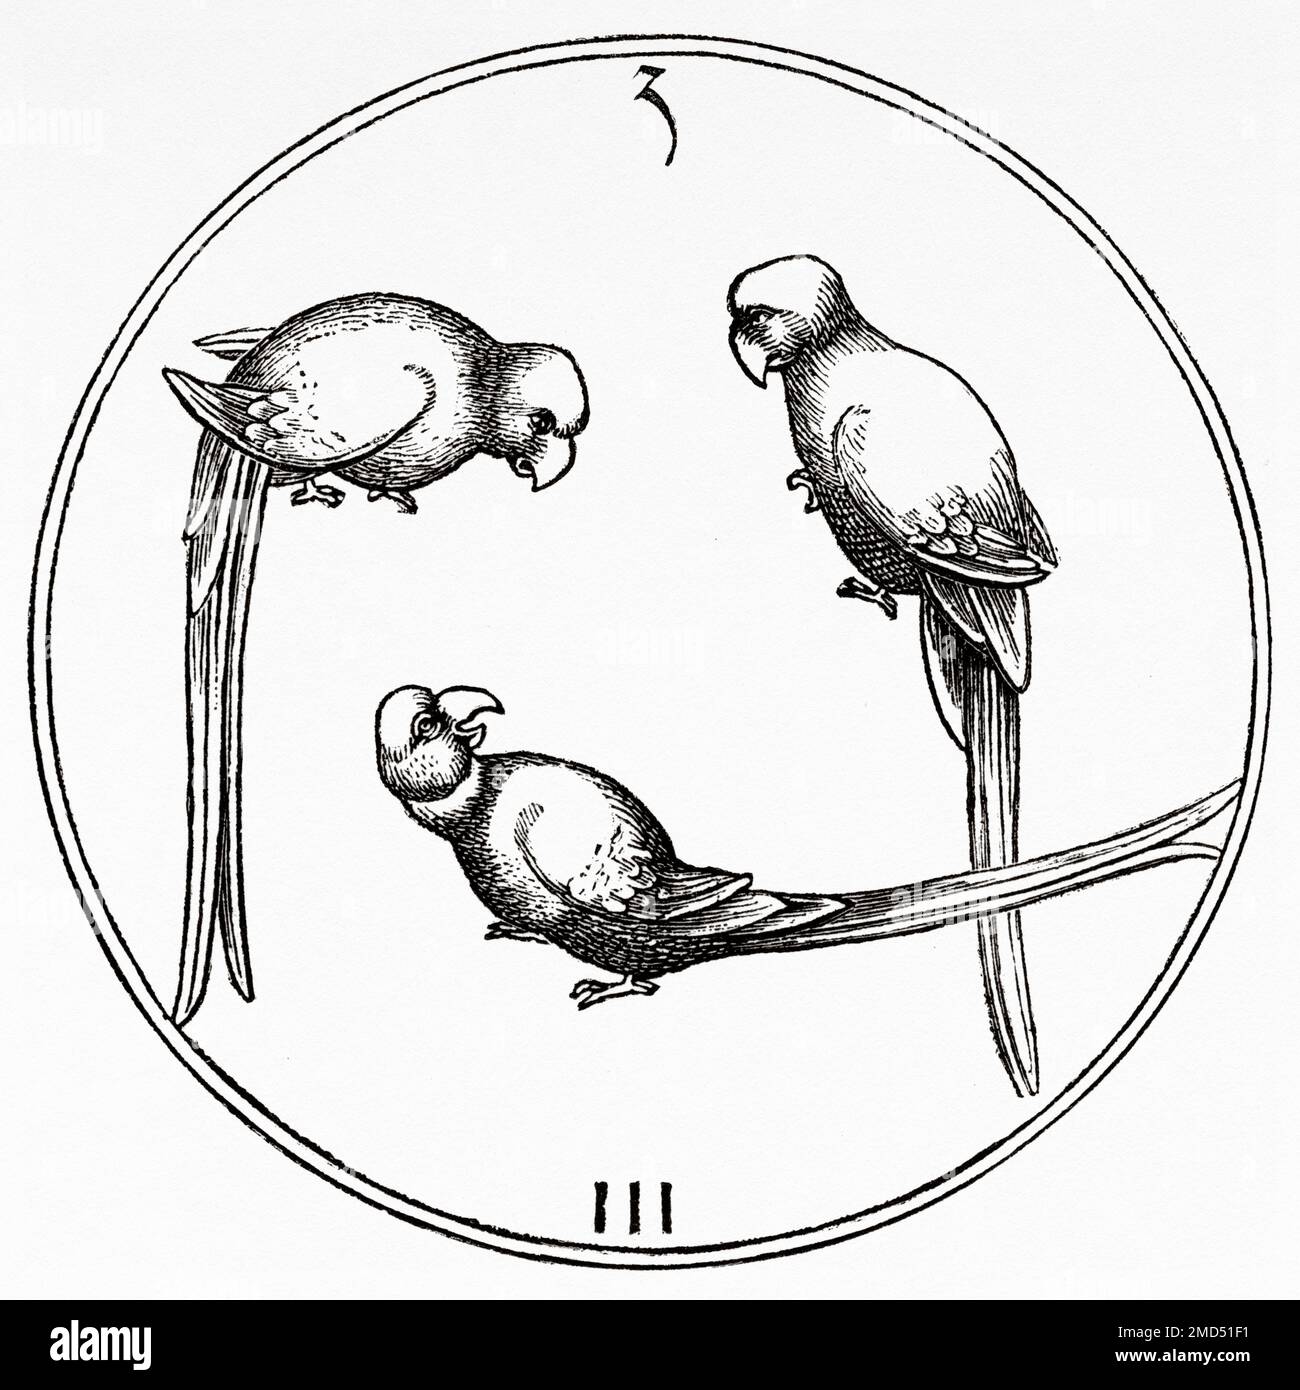 Three of parrot. German card game from the end of the 15th century. The Arts of the Middle Ages and at the Period of the Renaissance by Paul Lacroix, 1874 Stock Photo